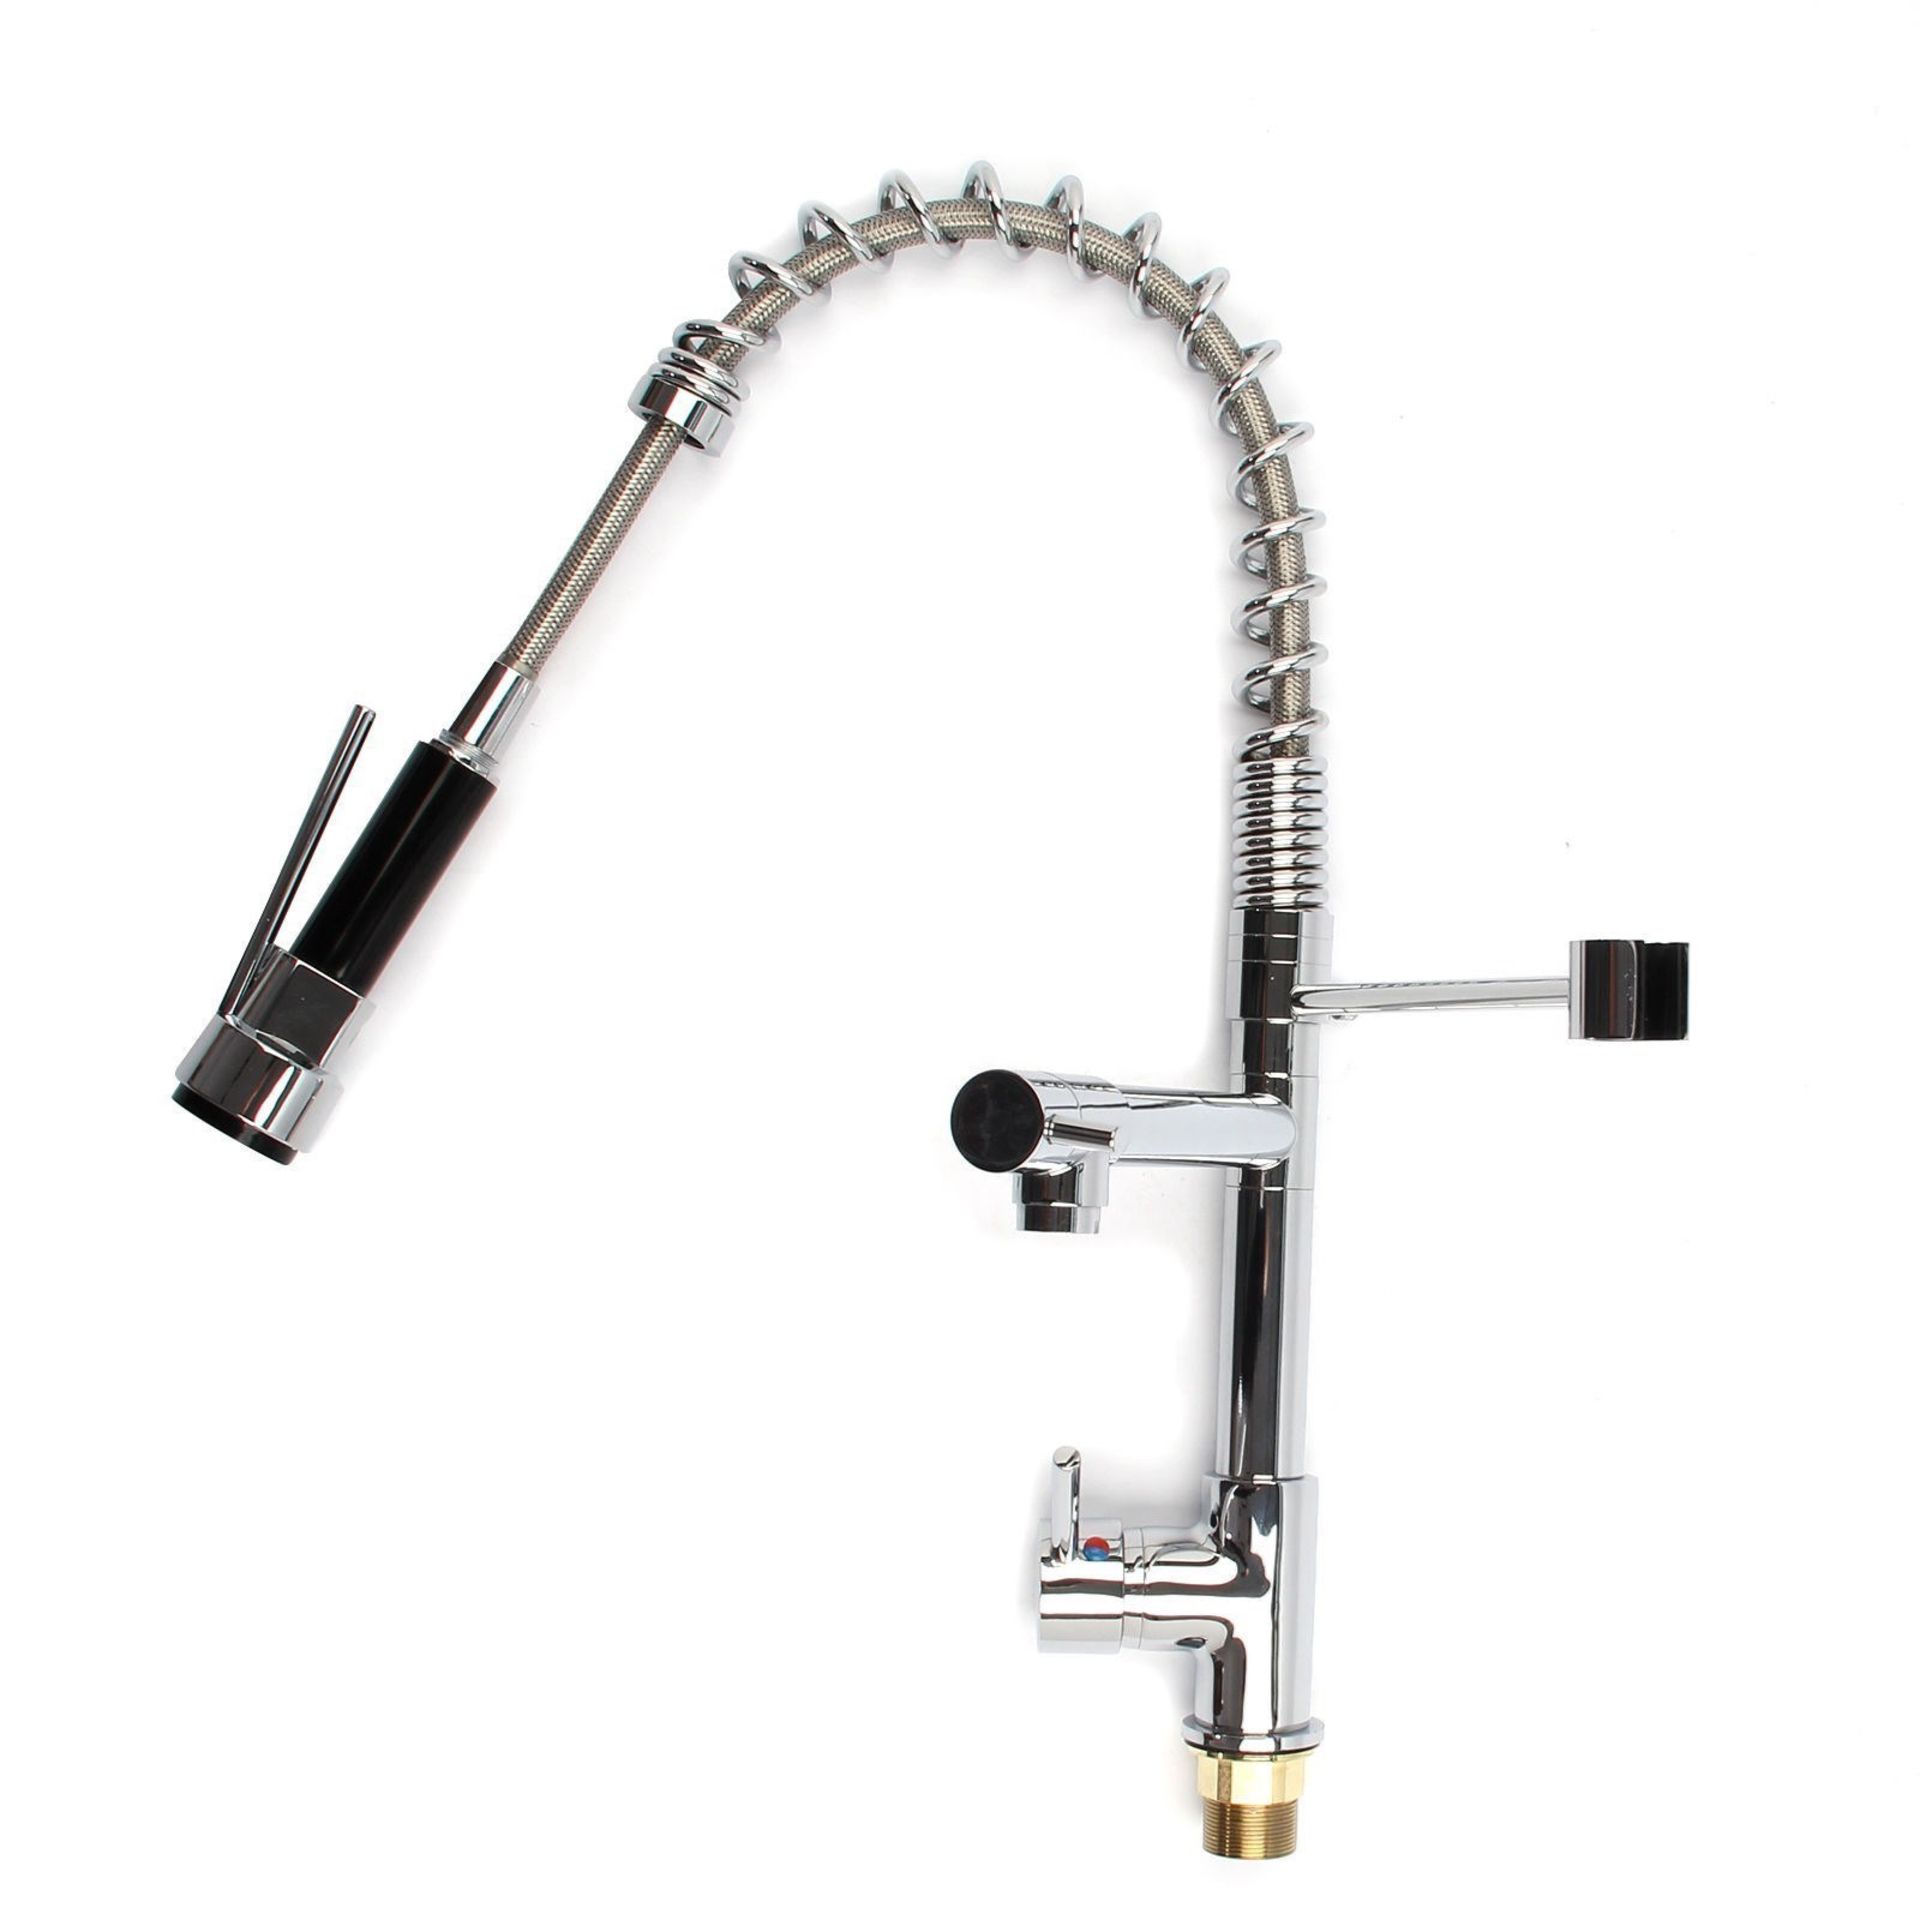 (MC220) Bentley Modern Monobloc Chrome Brass Pull Out Spray Mixer Tap. RRP £349.99. This tap is from - Image 3 of 4